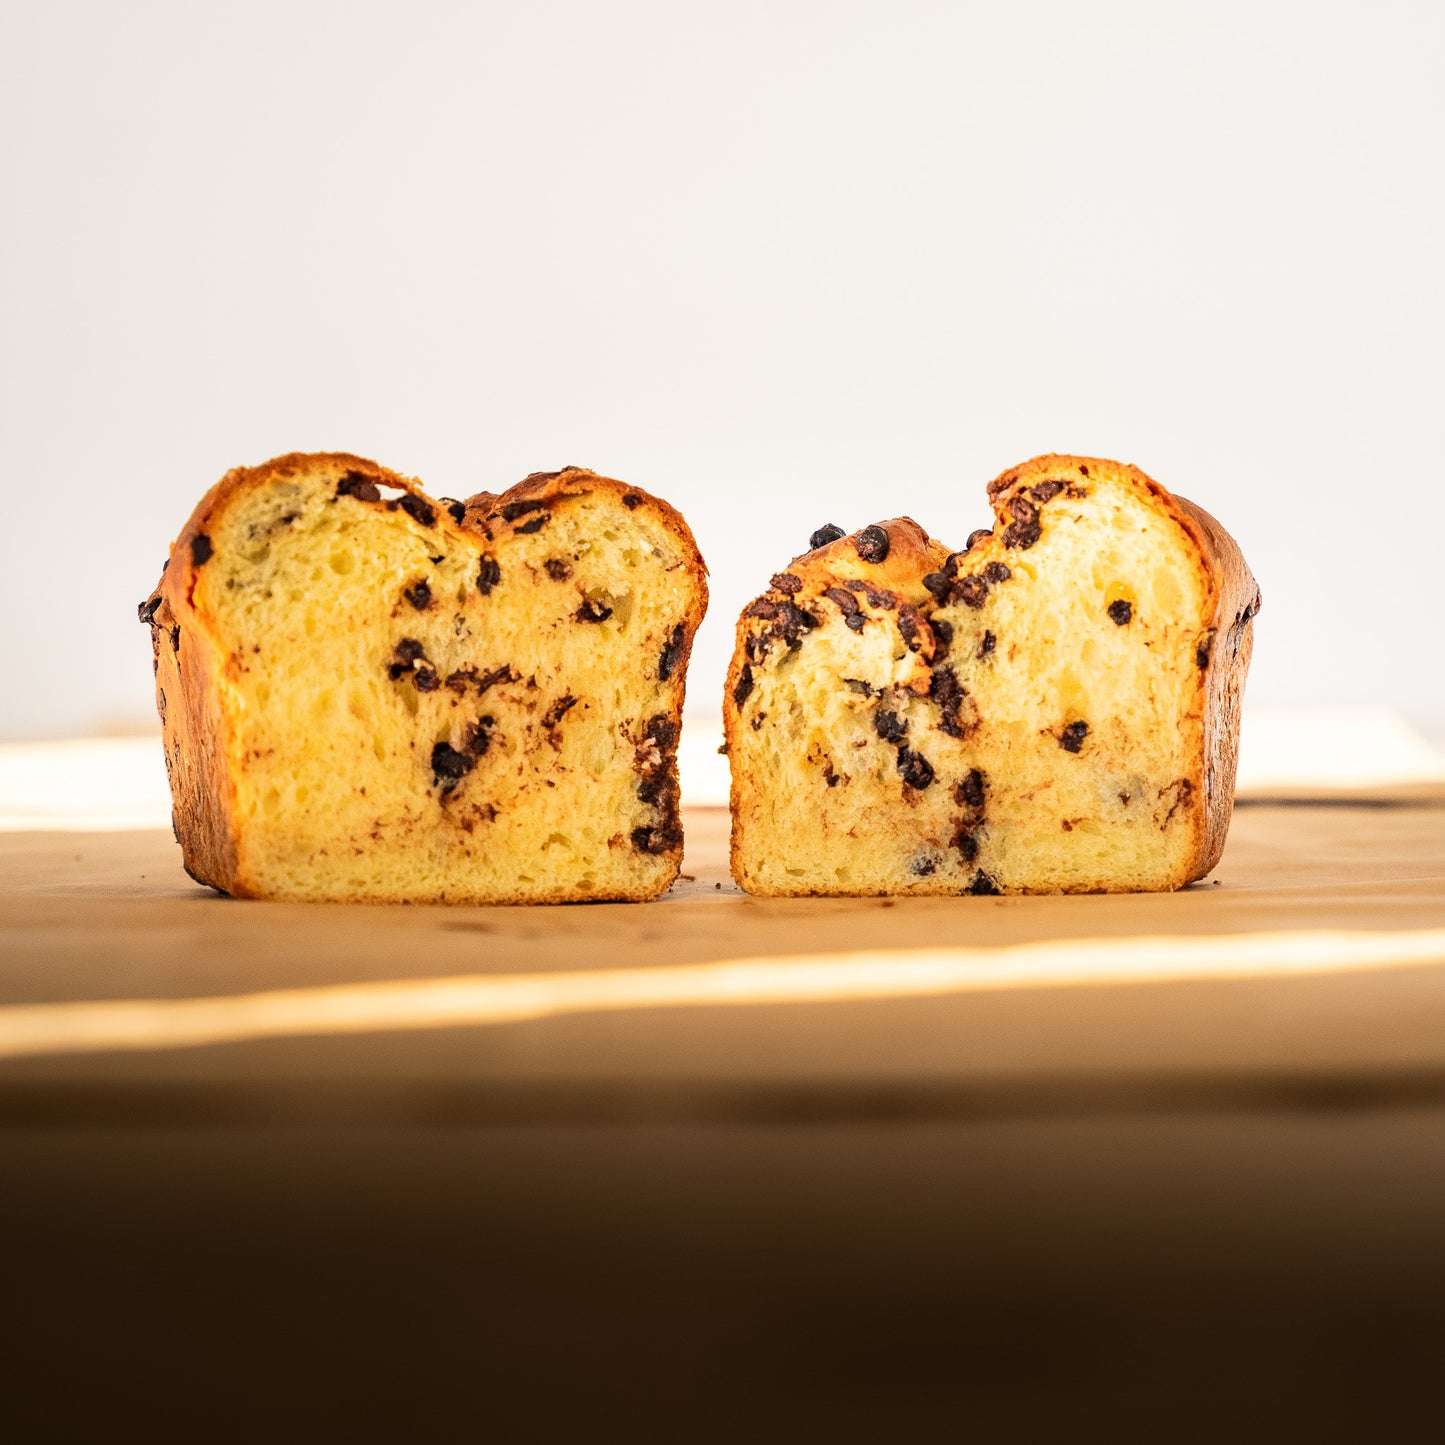 A Chocolate Brioche cut up in half showing all its chocolatey and softness inside.